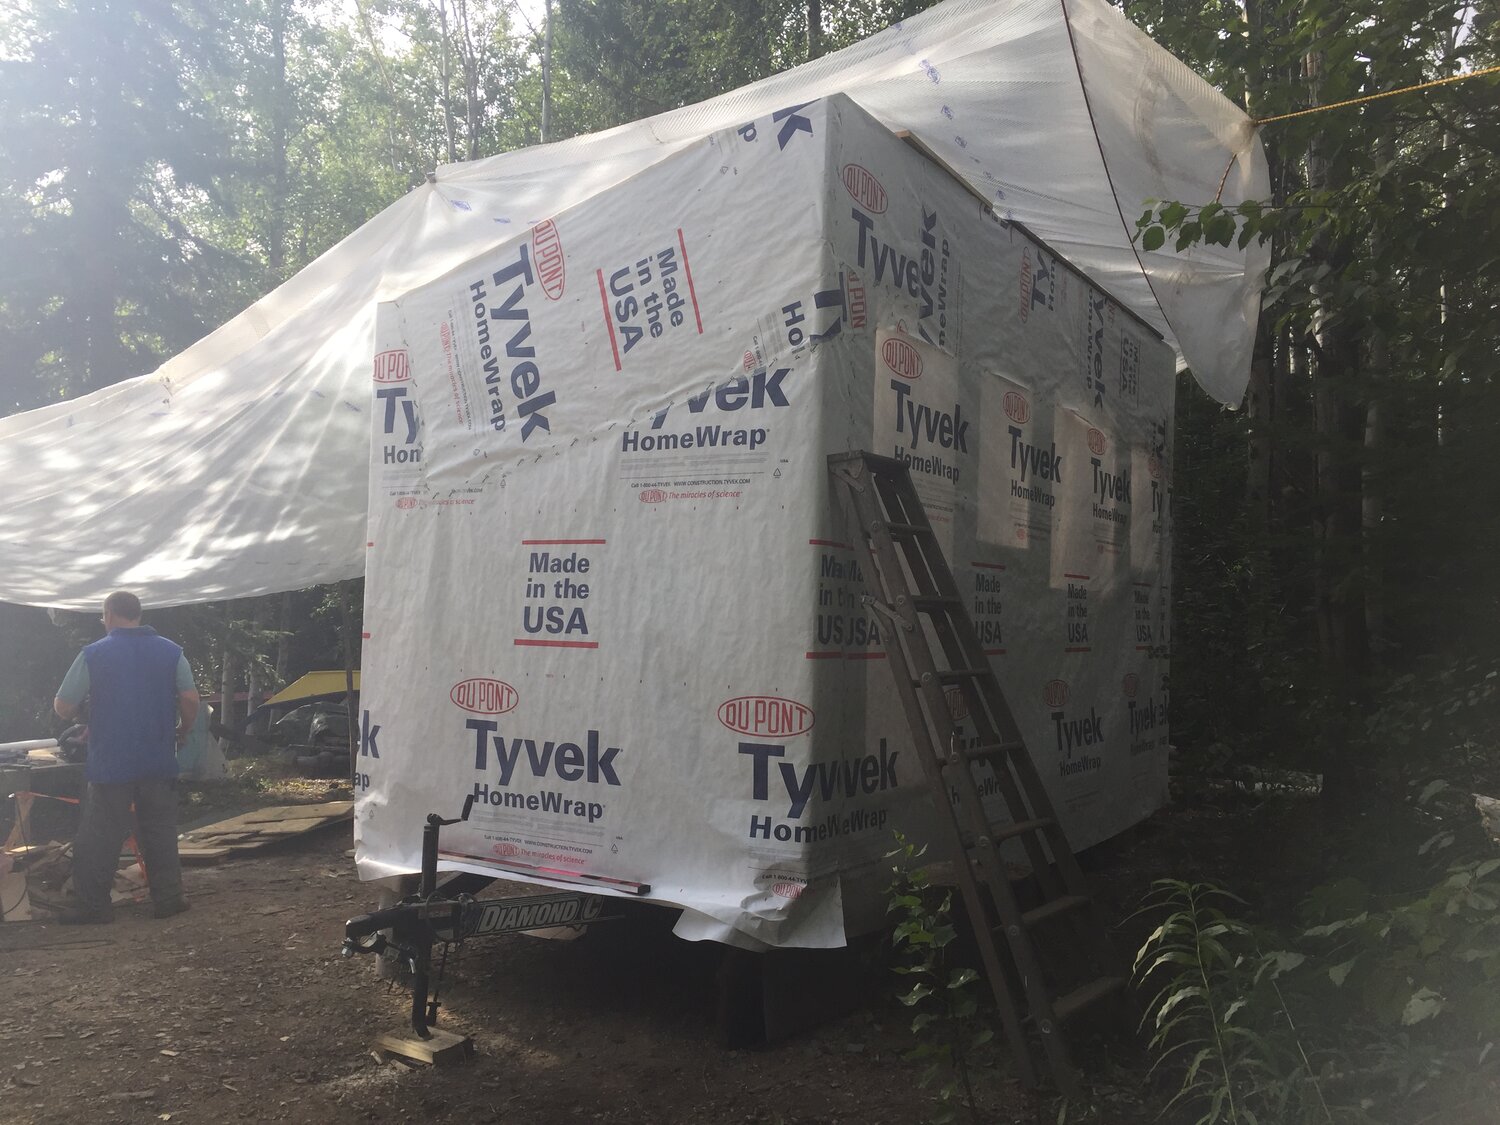 Tyvek covers the outside of the tiny gallery as it is protected under a tarp, image courtesy of the artist